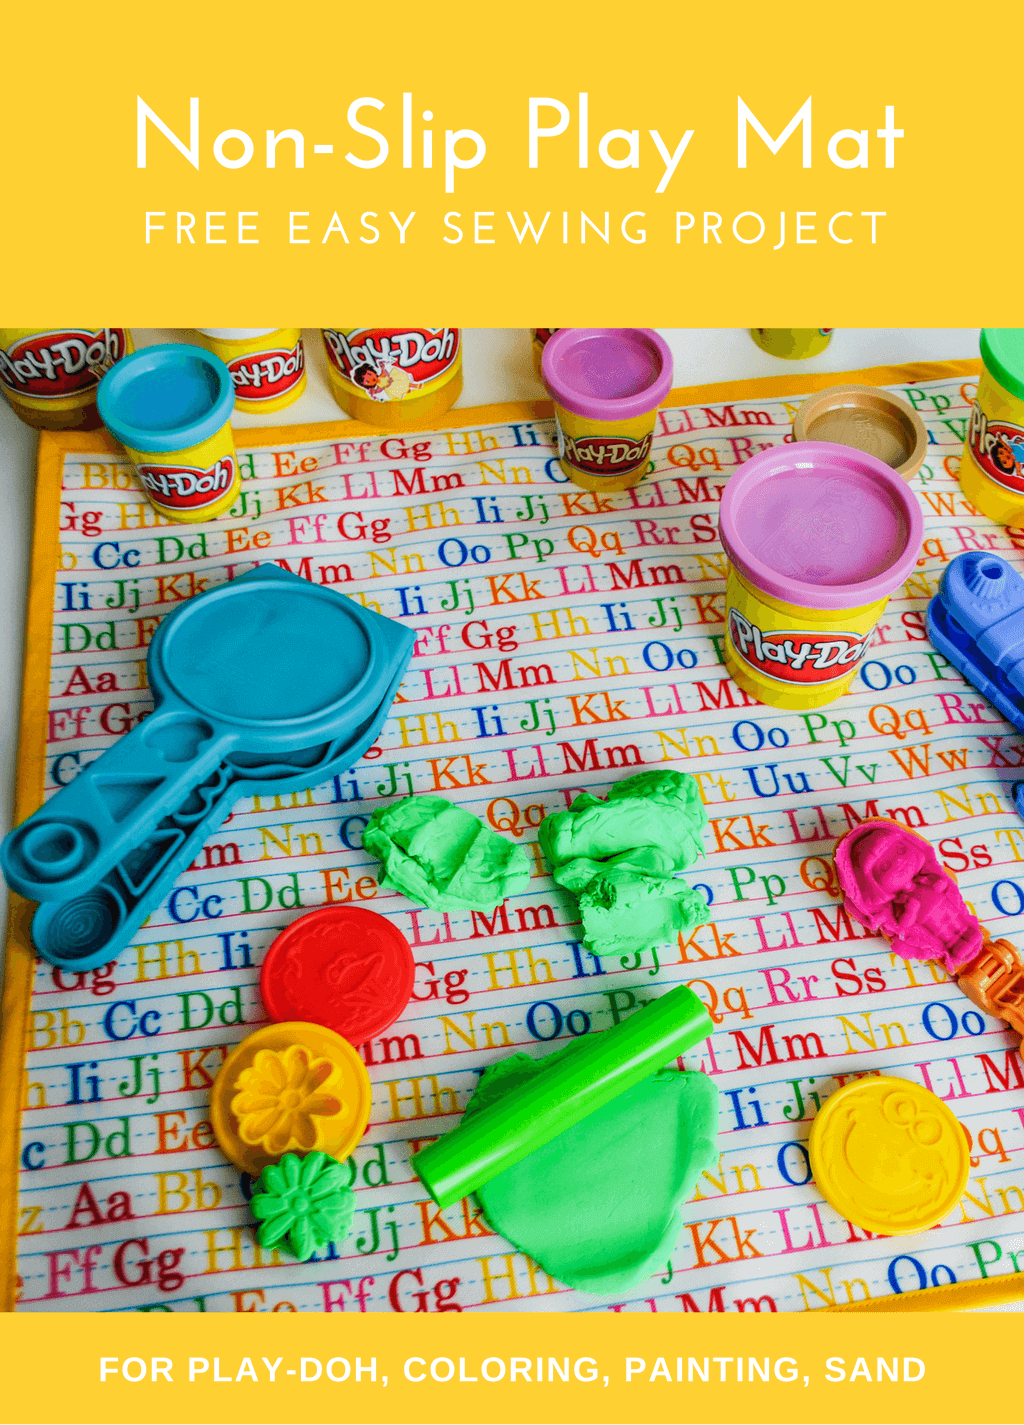 DIY kids non-slip play mat free sewing pattern. Use it for Play-Doh, markers, coloring, painting, sand and more. Stays put and toss into the washer to clean! #freesewingpattern #sewingforkids #diyforkids #diygifts #sewing #sewingforkids